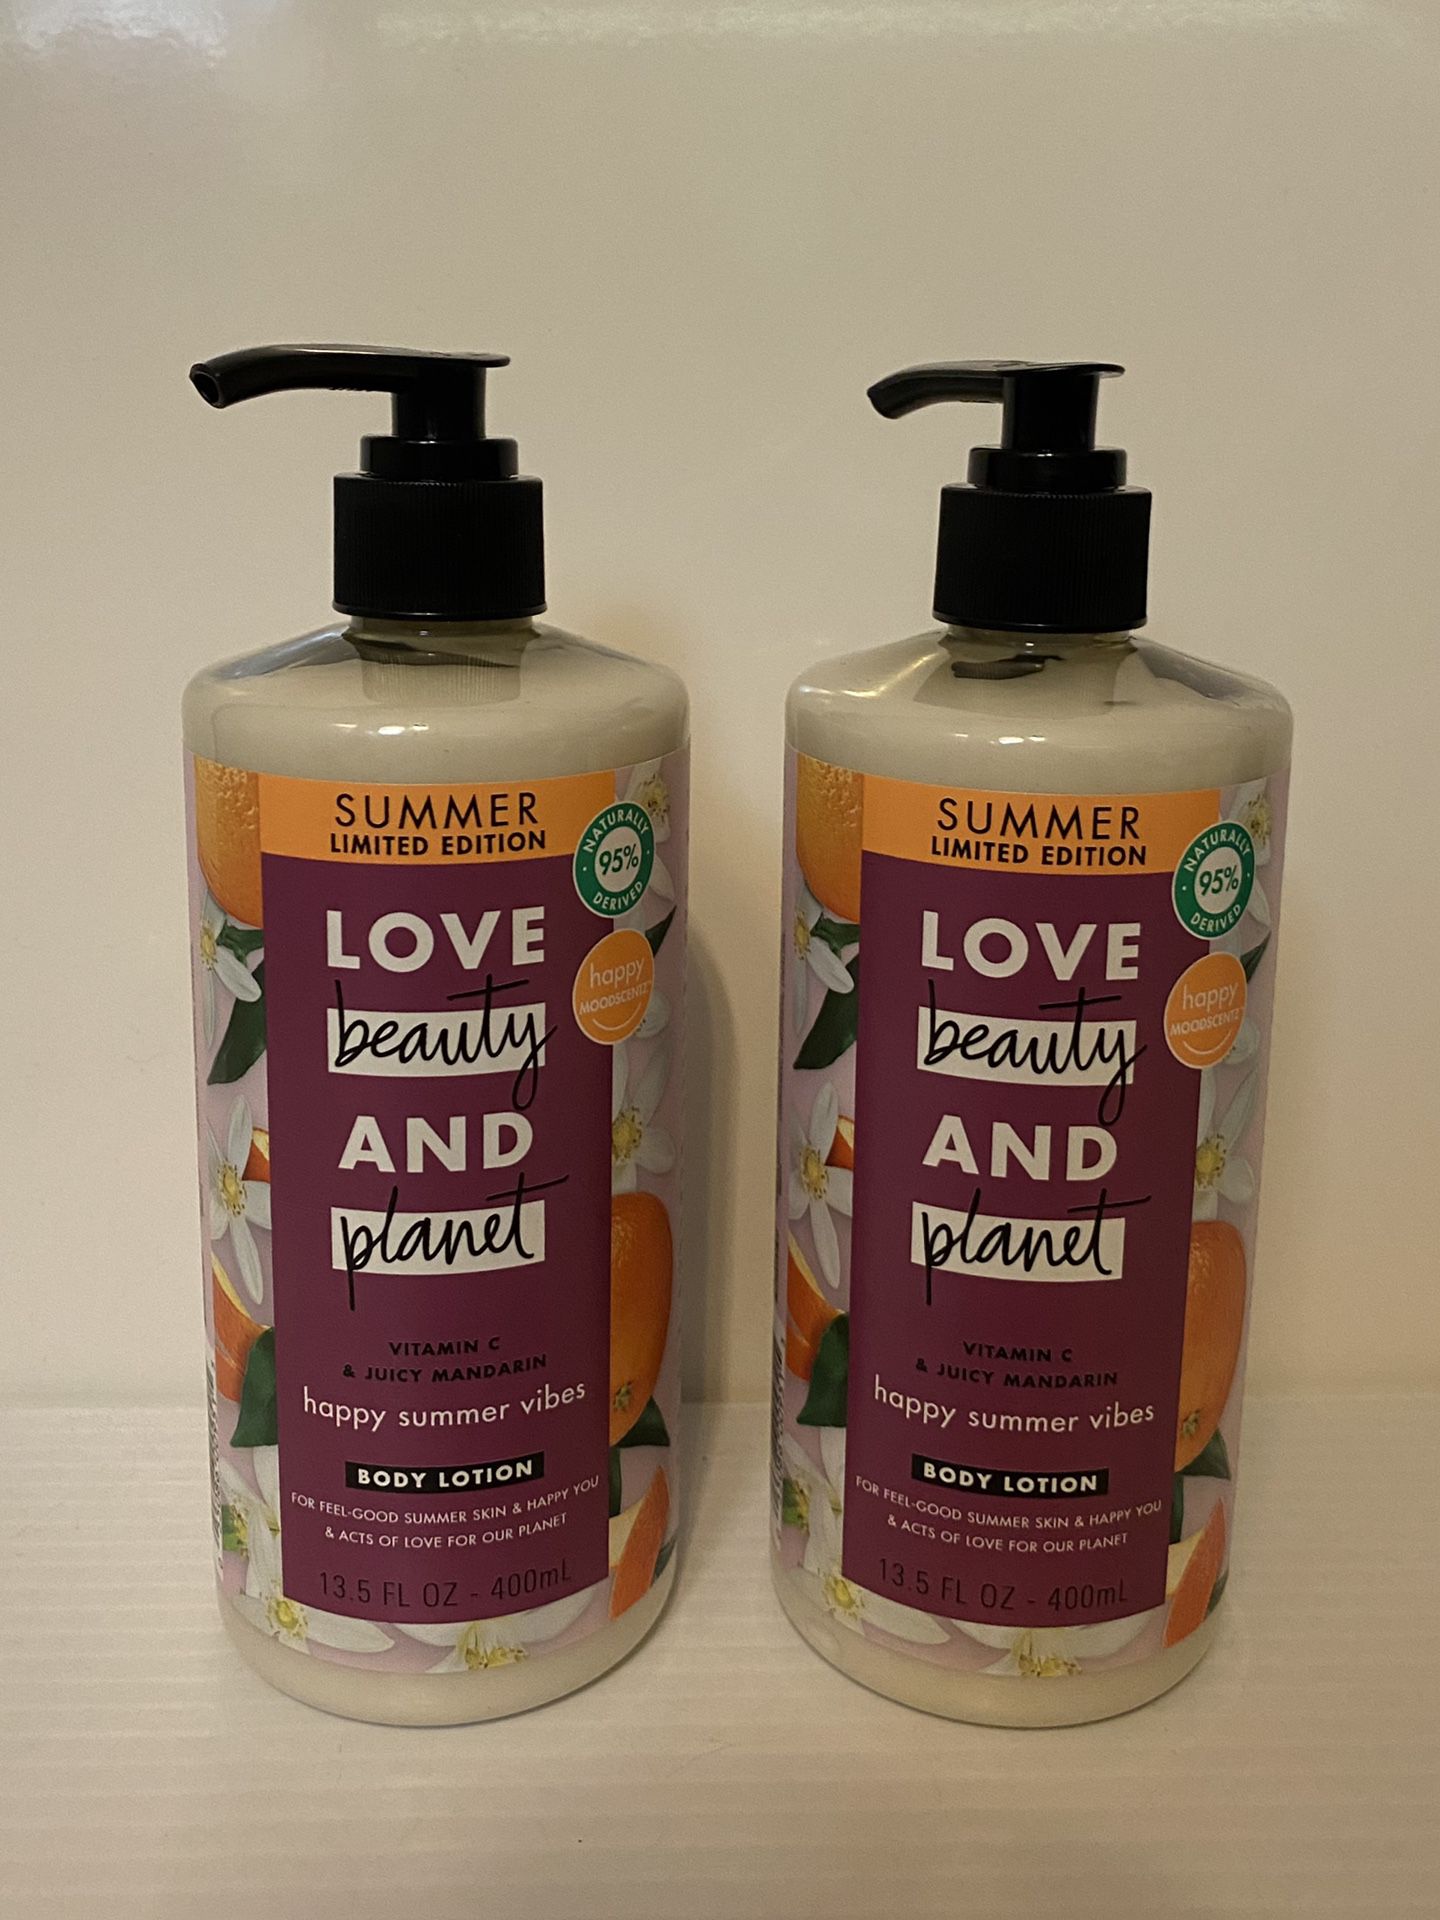 NEW Set of LOVE beauty AND planet Body Lotions     13.98$ Total RETAIL